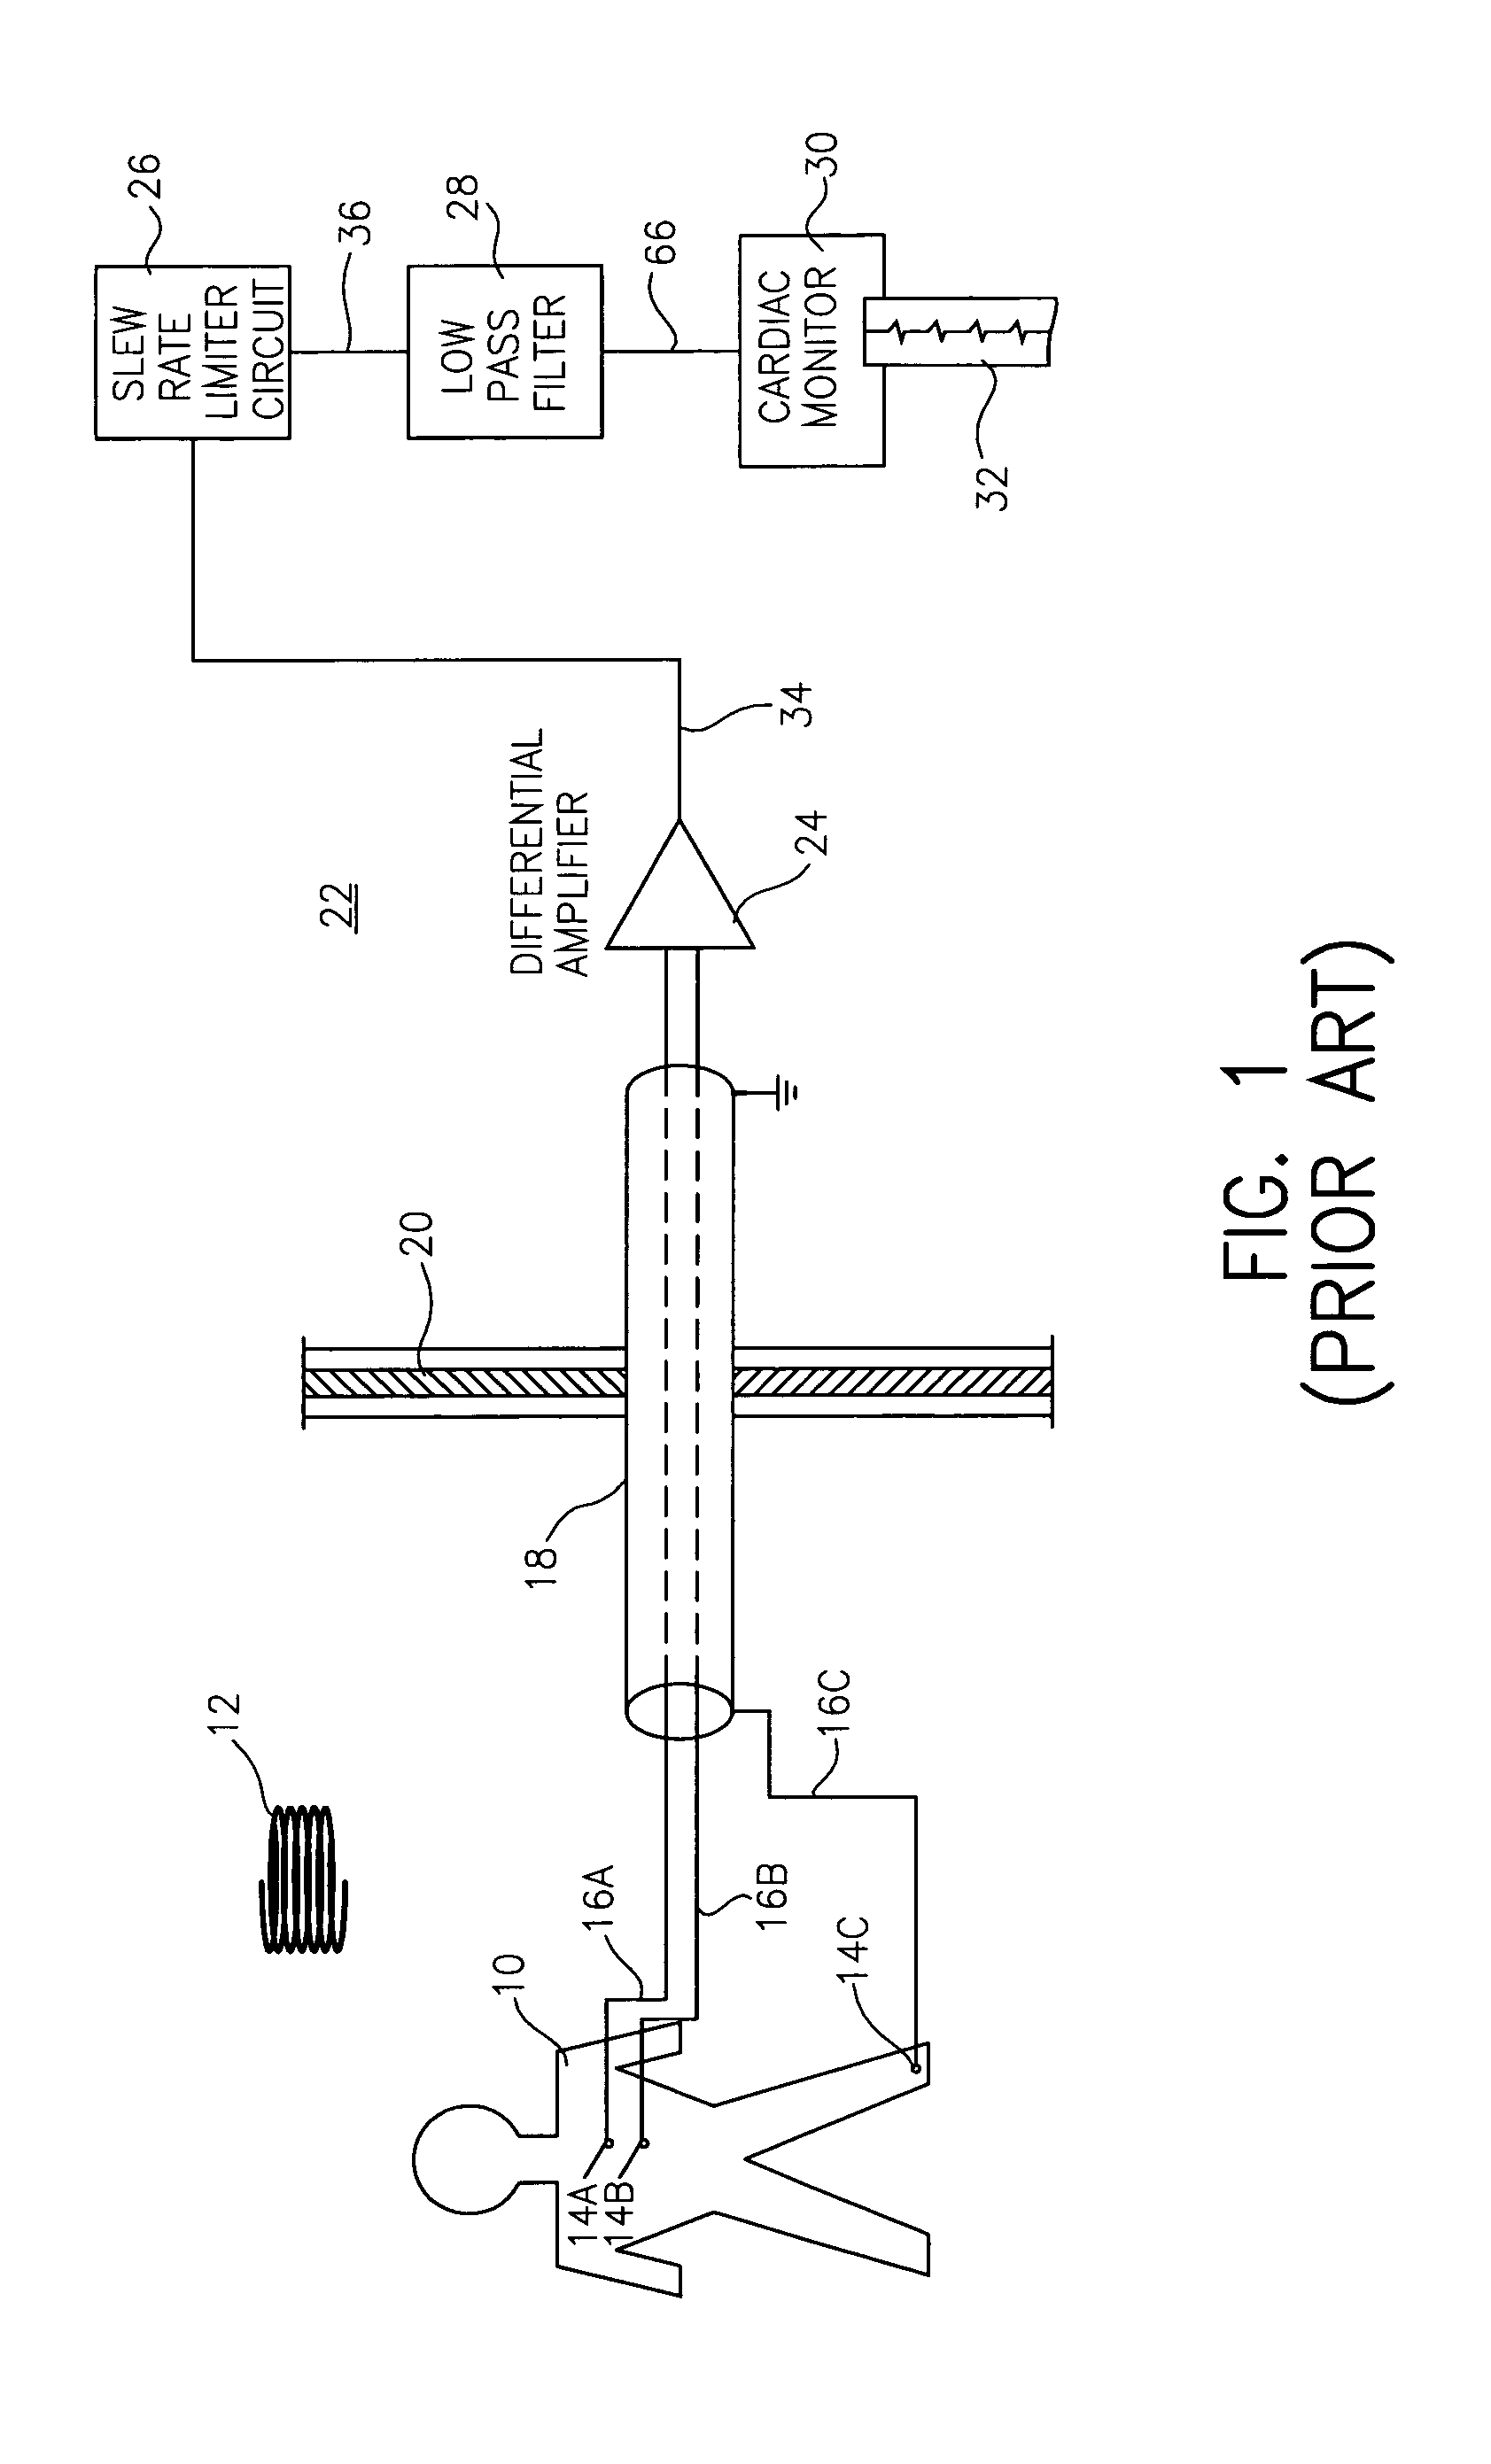 Apparatus and method for removing magnetic resonance imaging-induced noise from ECG signals